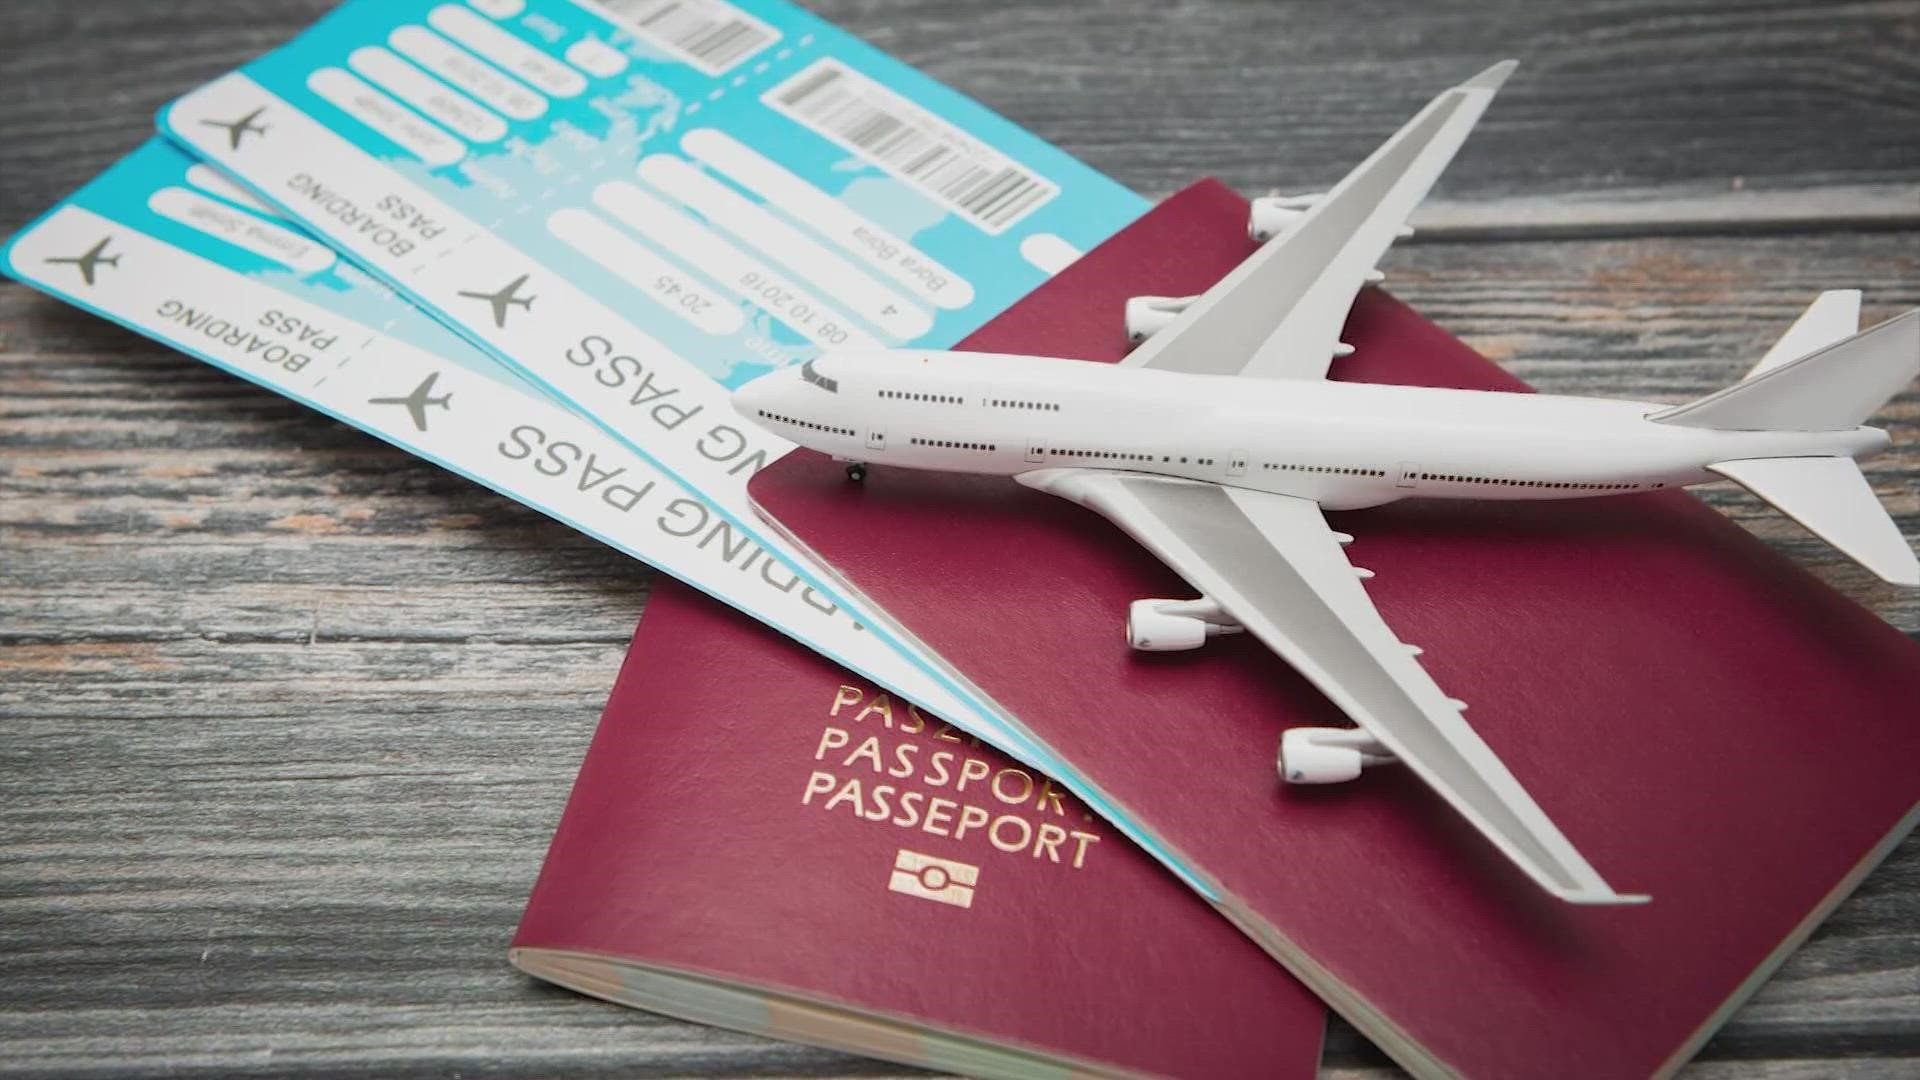 Cheap Plane Tickets: How to Find and Book Them